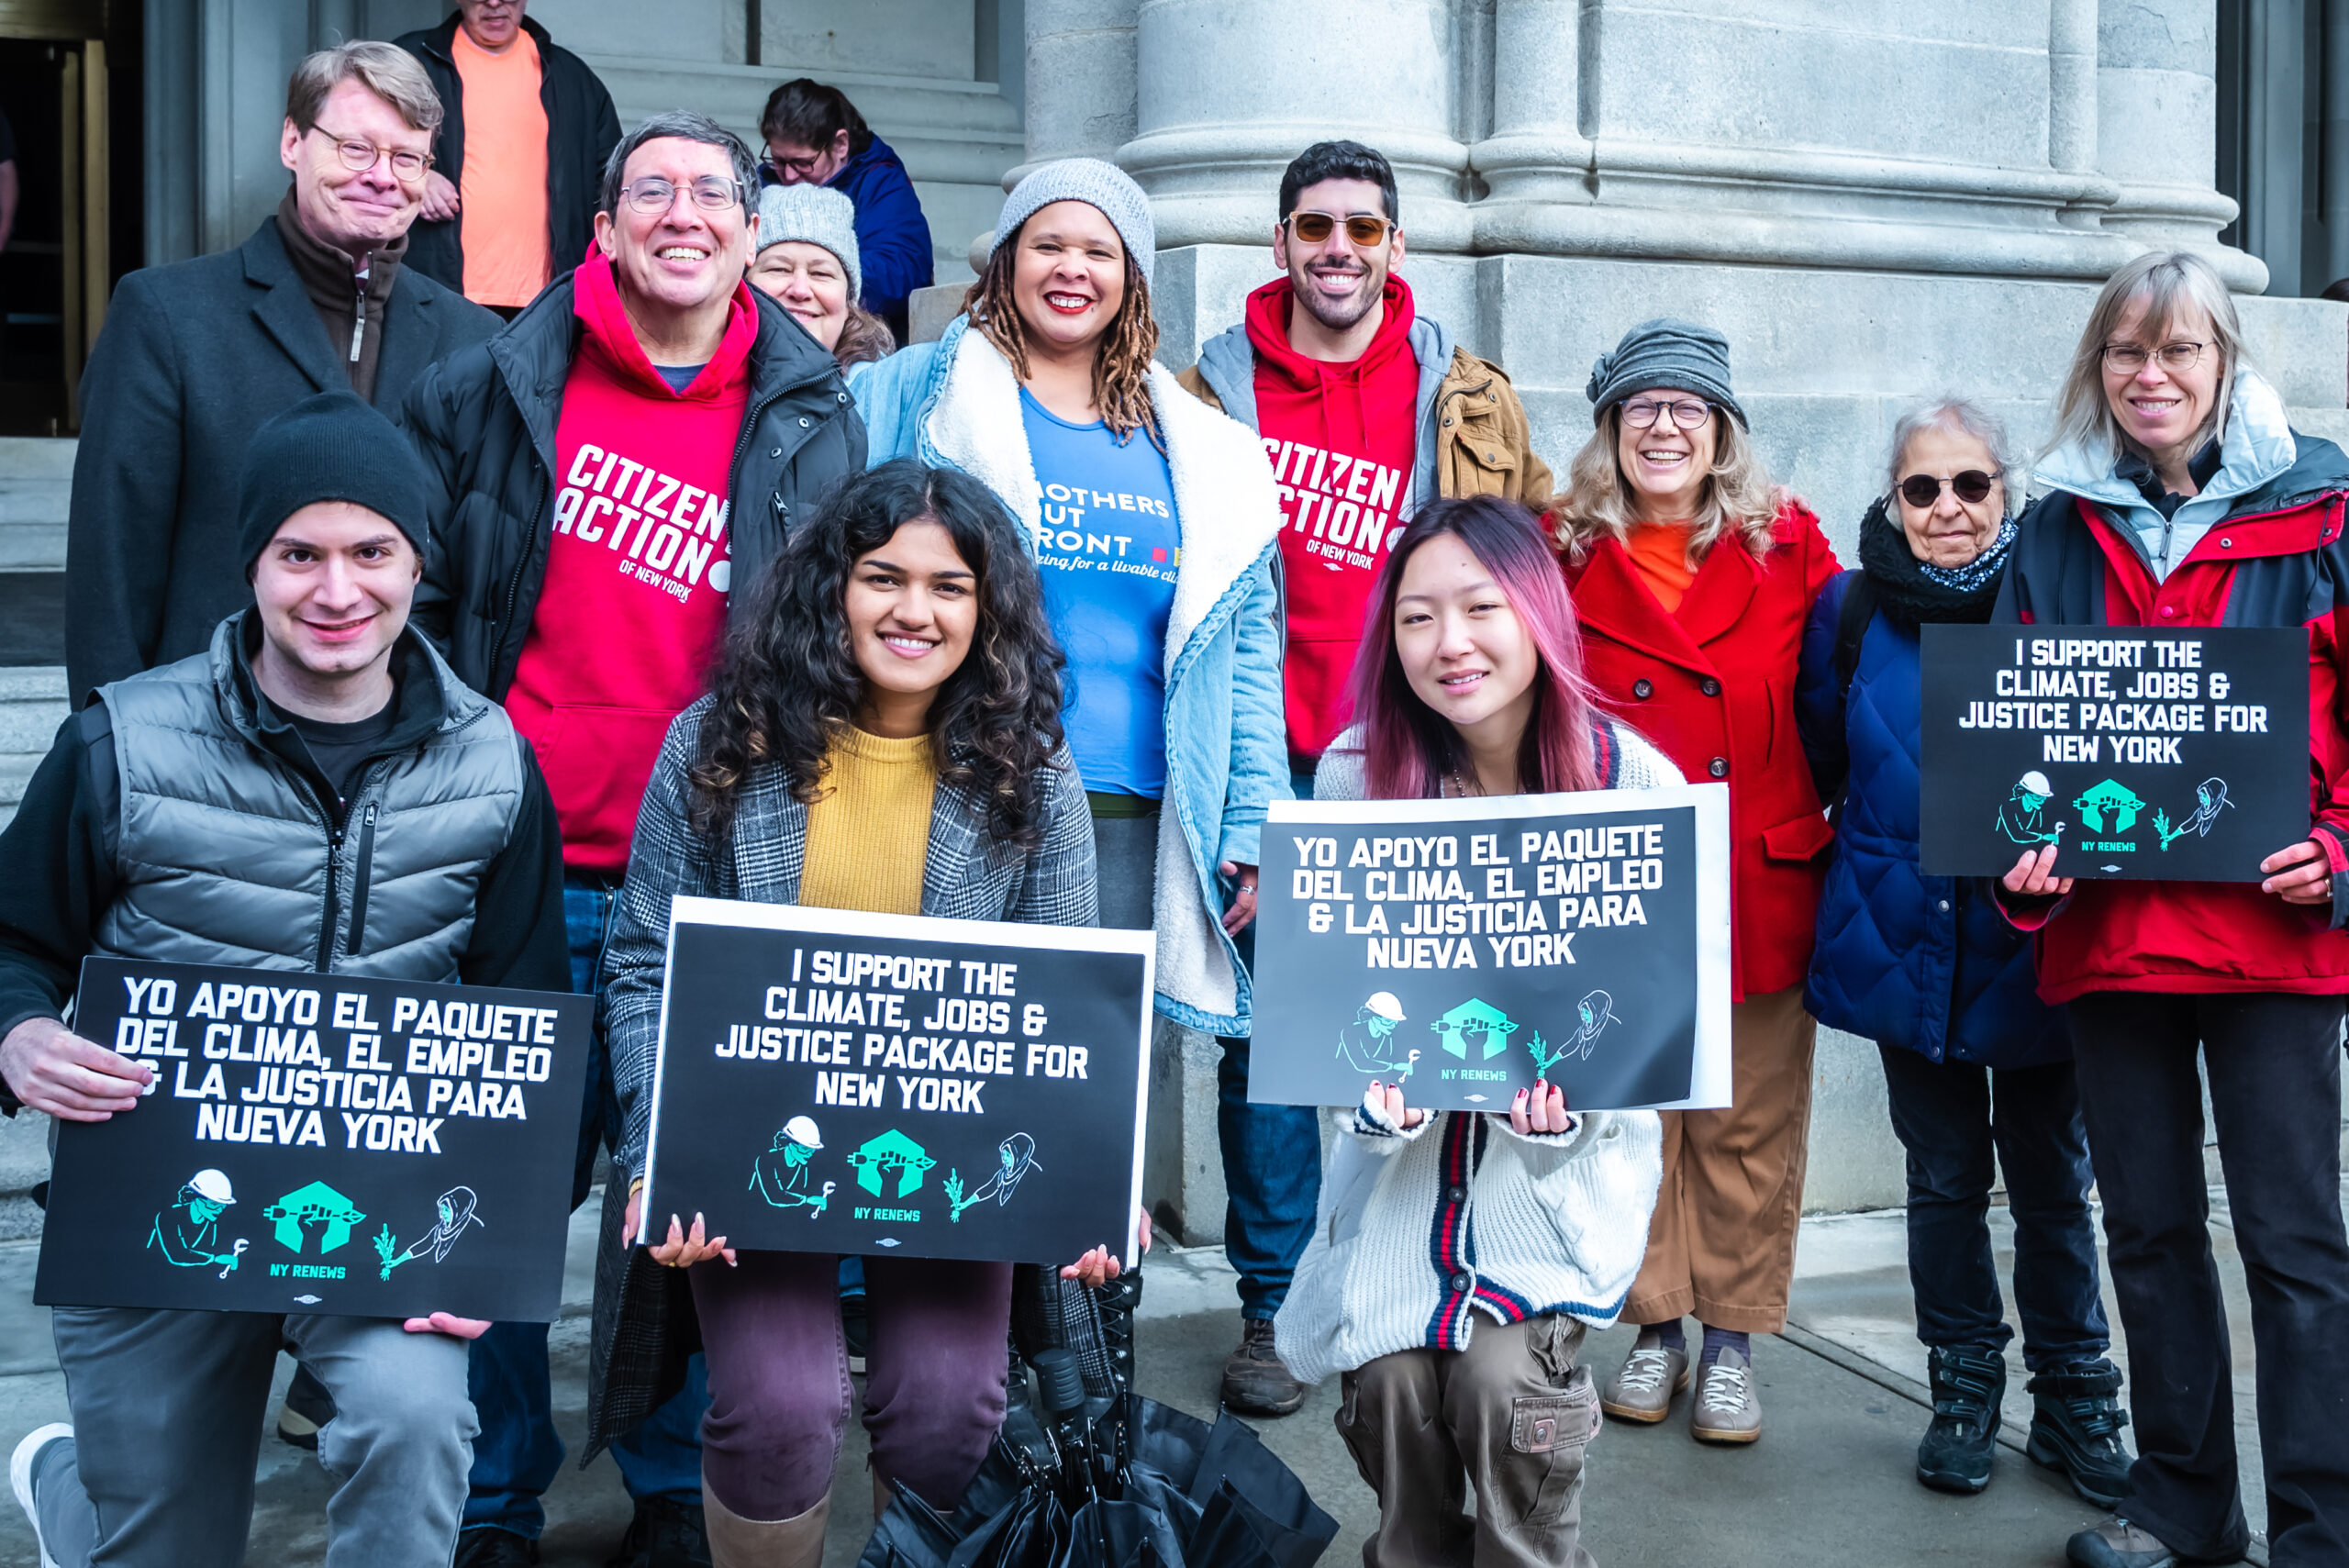 Members of NY Renews standing with climate justice signs at a rally in Albany, NY in support the climate, jobs, and justice package. They are smiling at the camera.